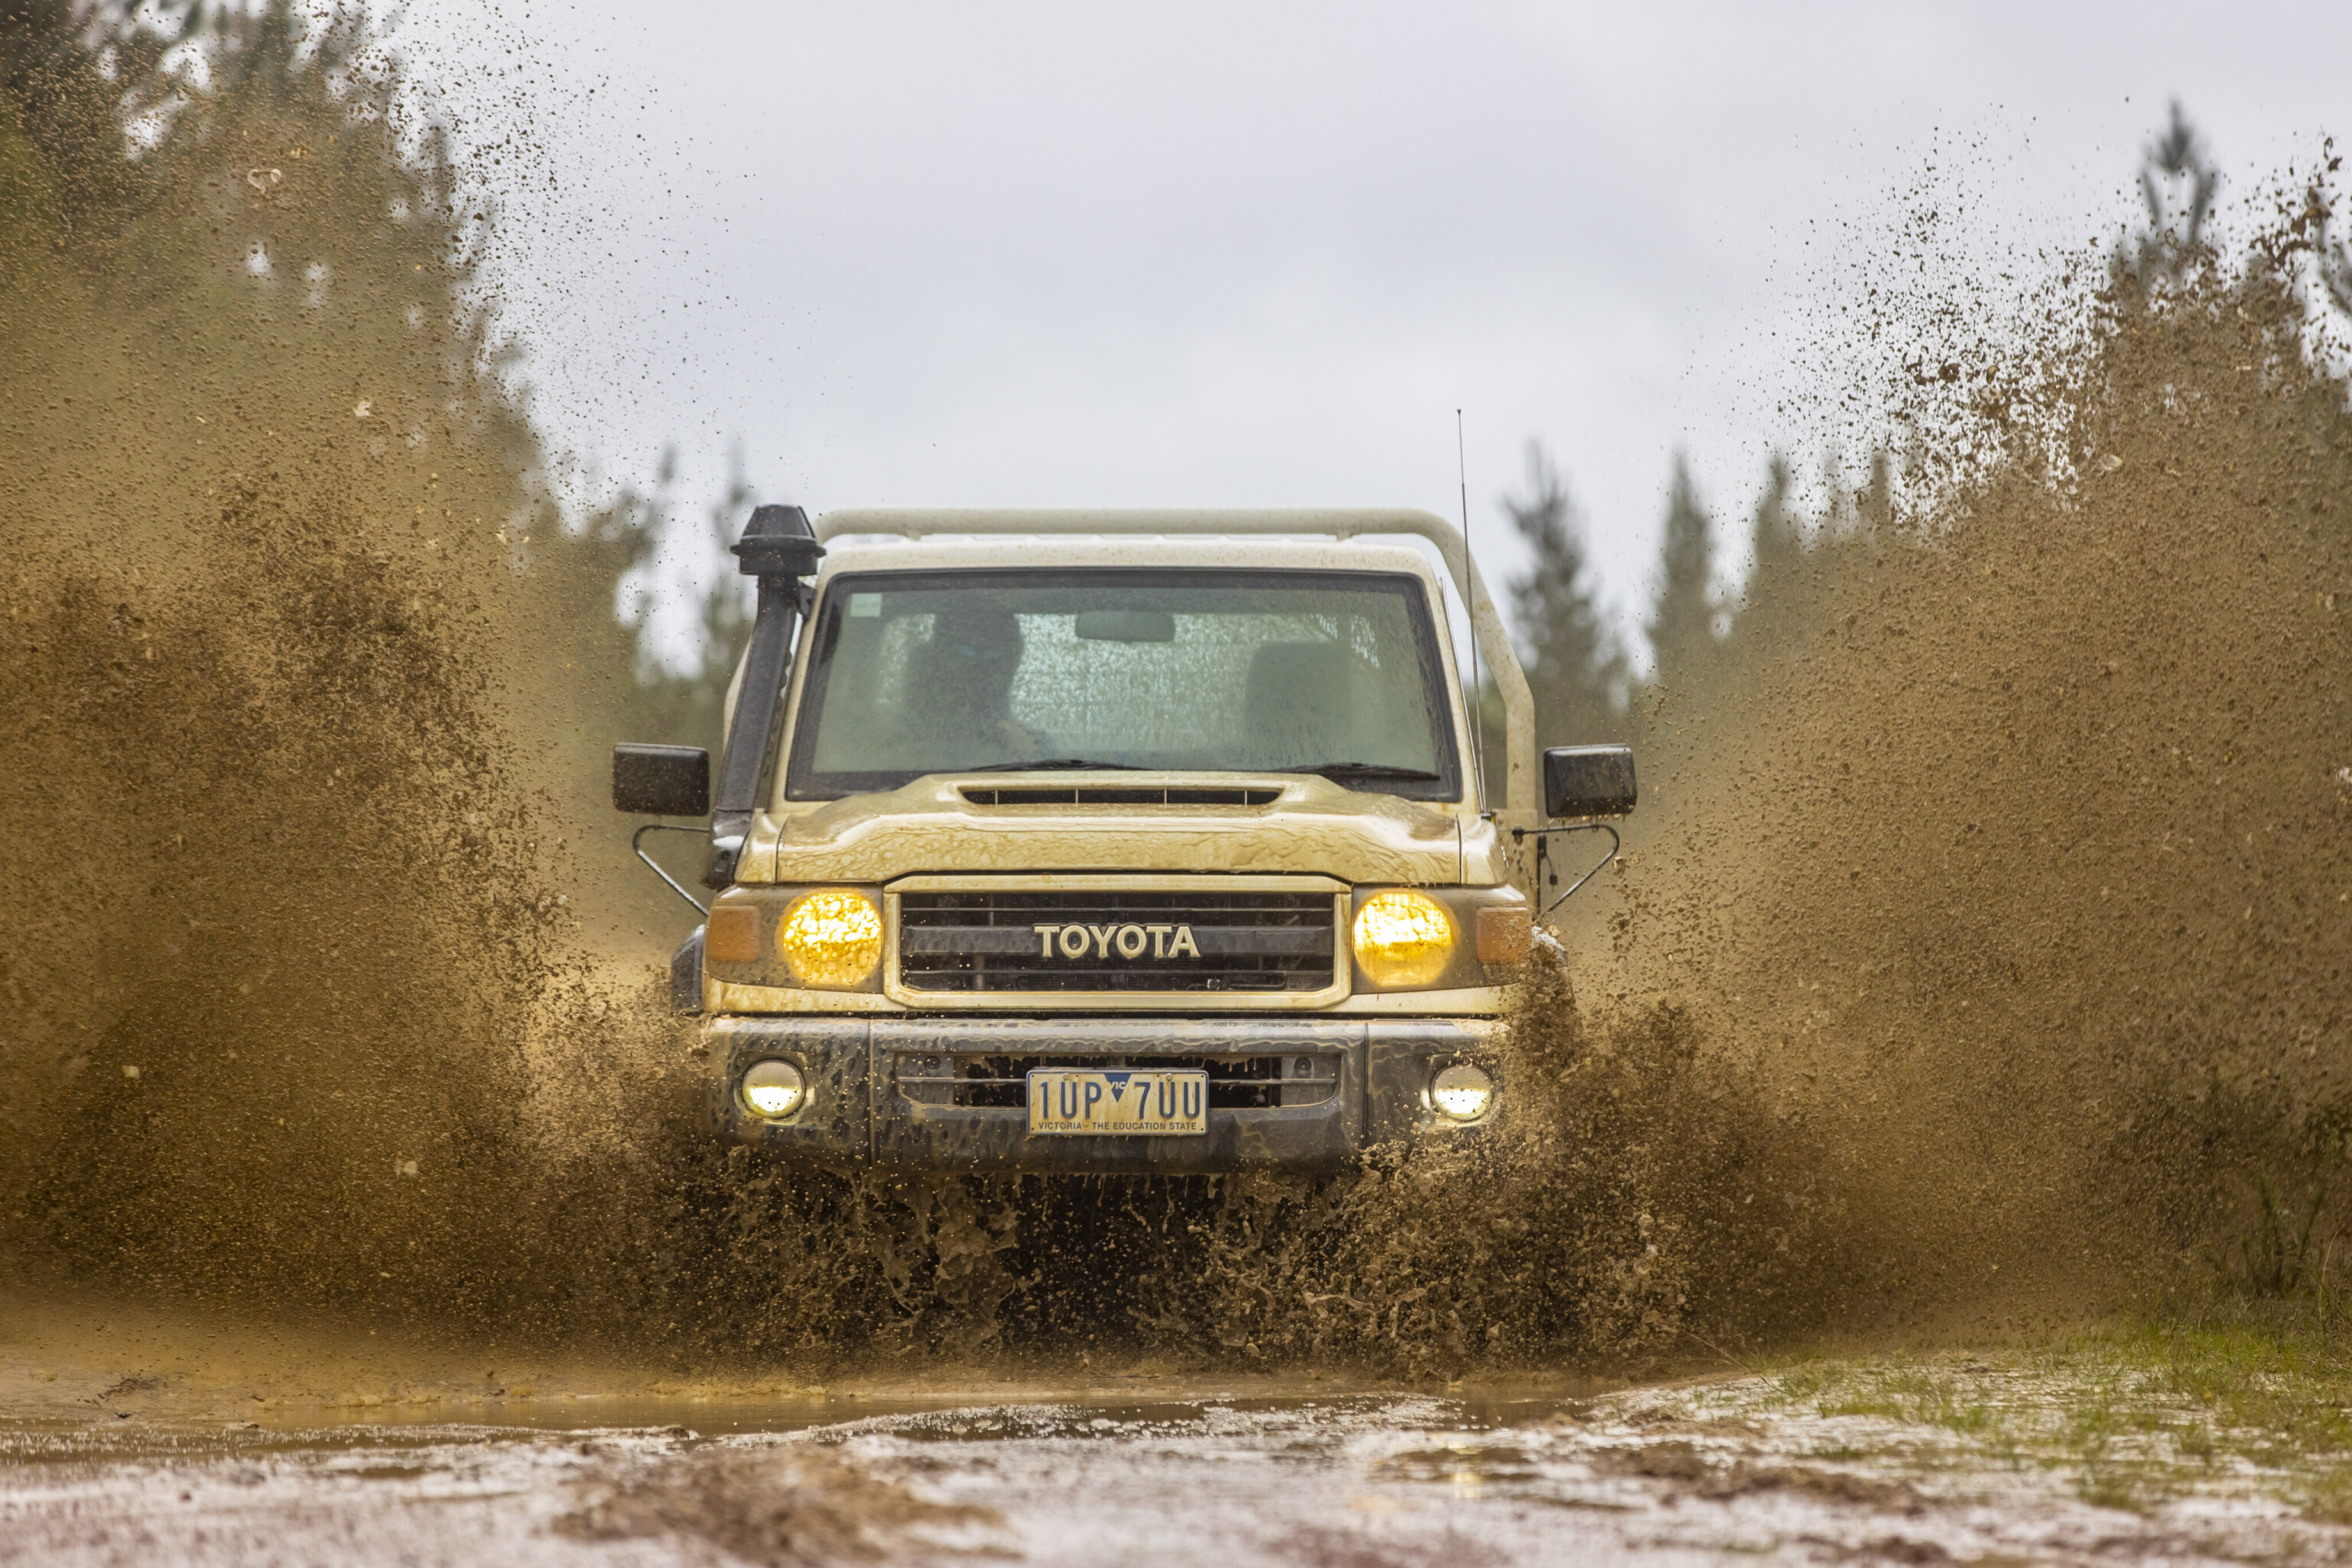 Get far, far off the beaten path with the best off-road vehicles on sale -  The Manual